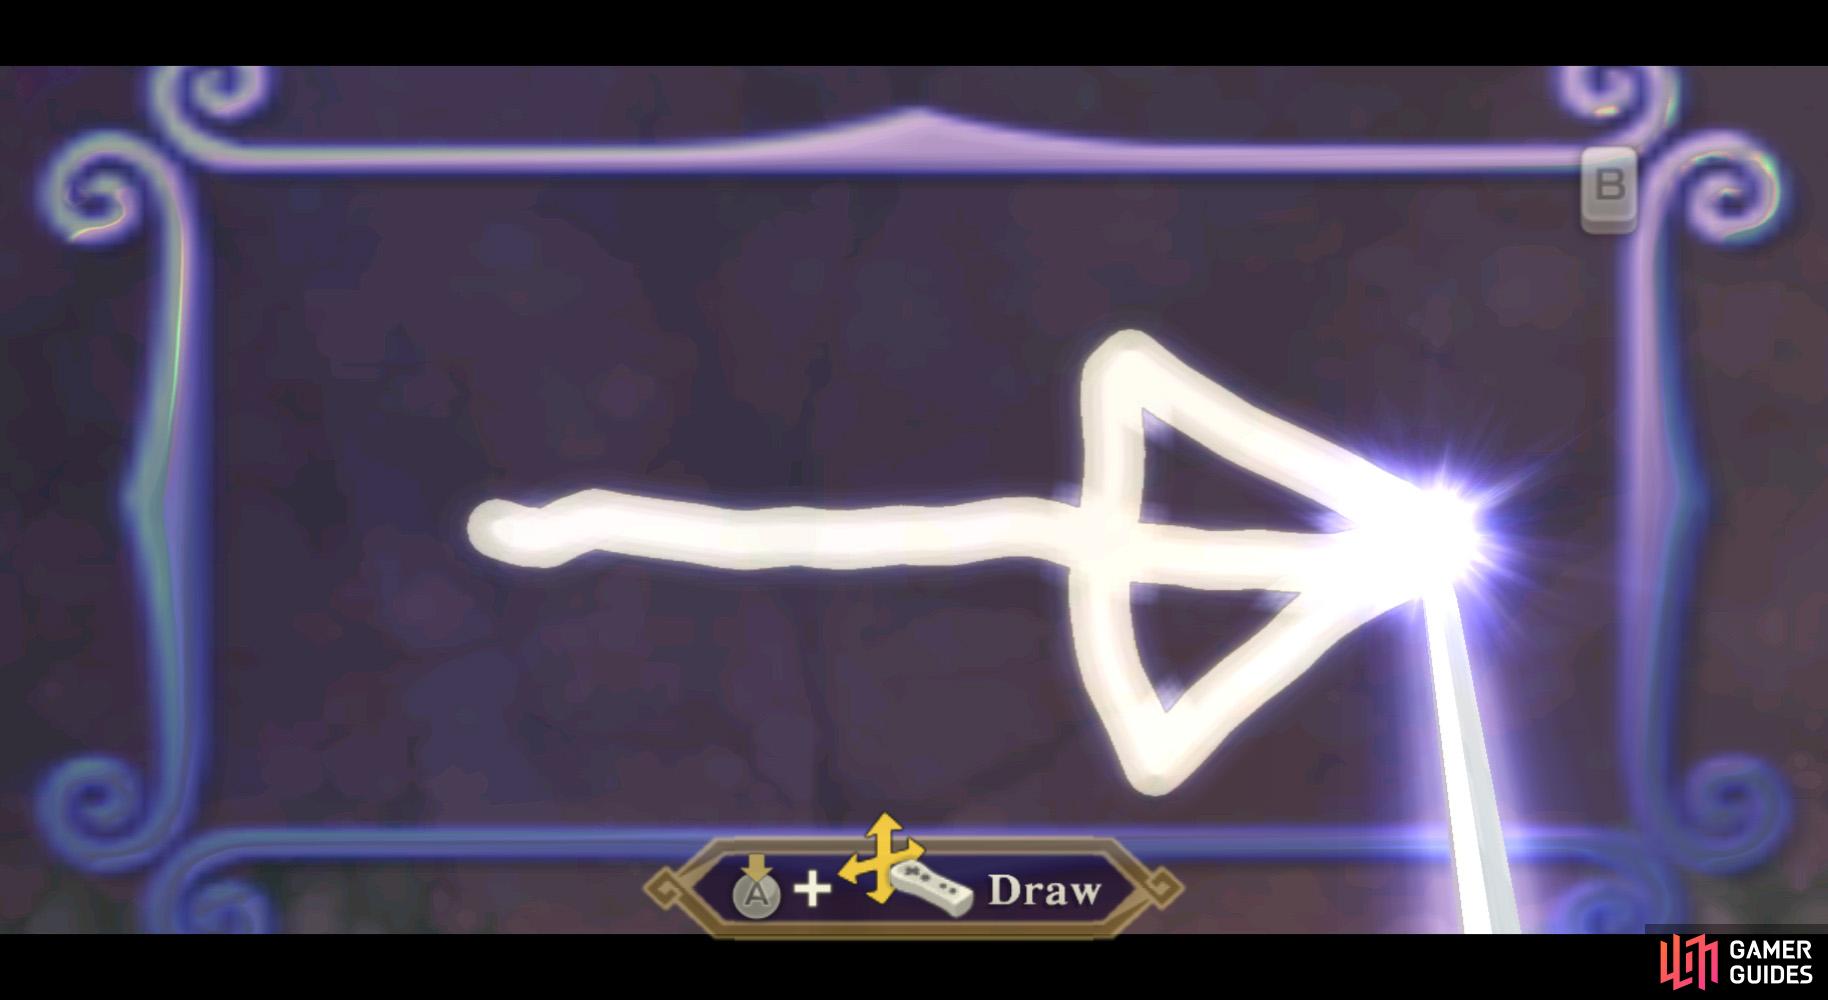 Charge a Skyward Strike in front of the wall and draw your best arrow shape.